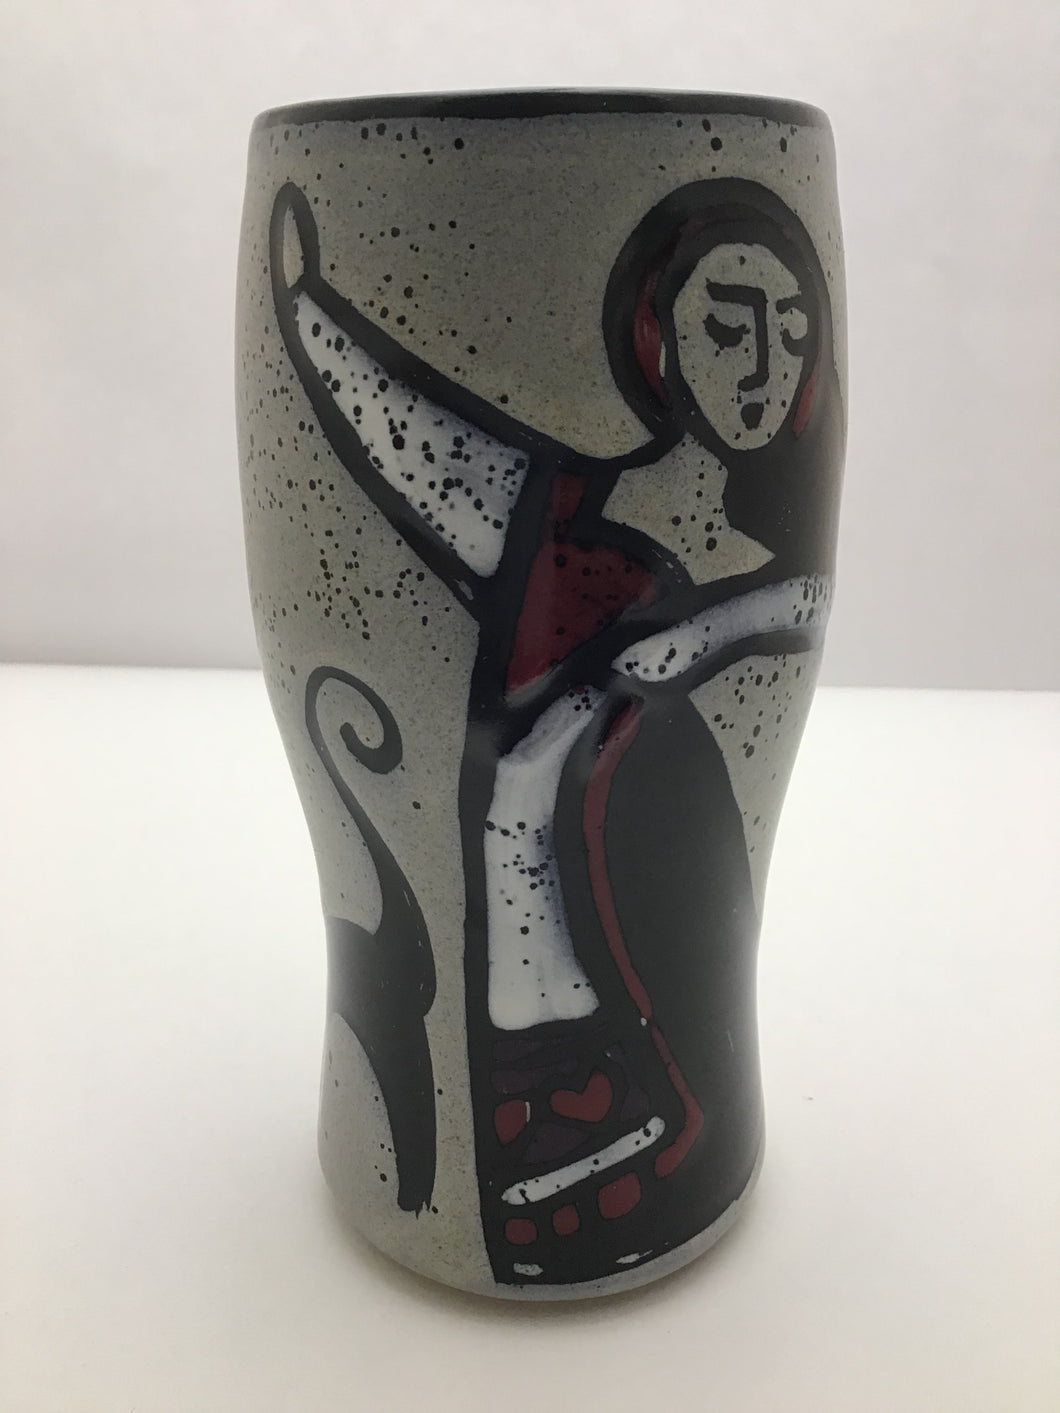 What Cheer: Dancing Lady Glass